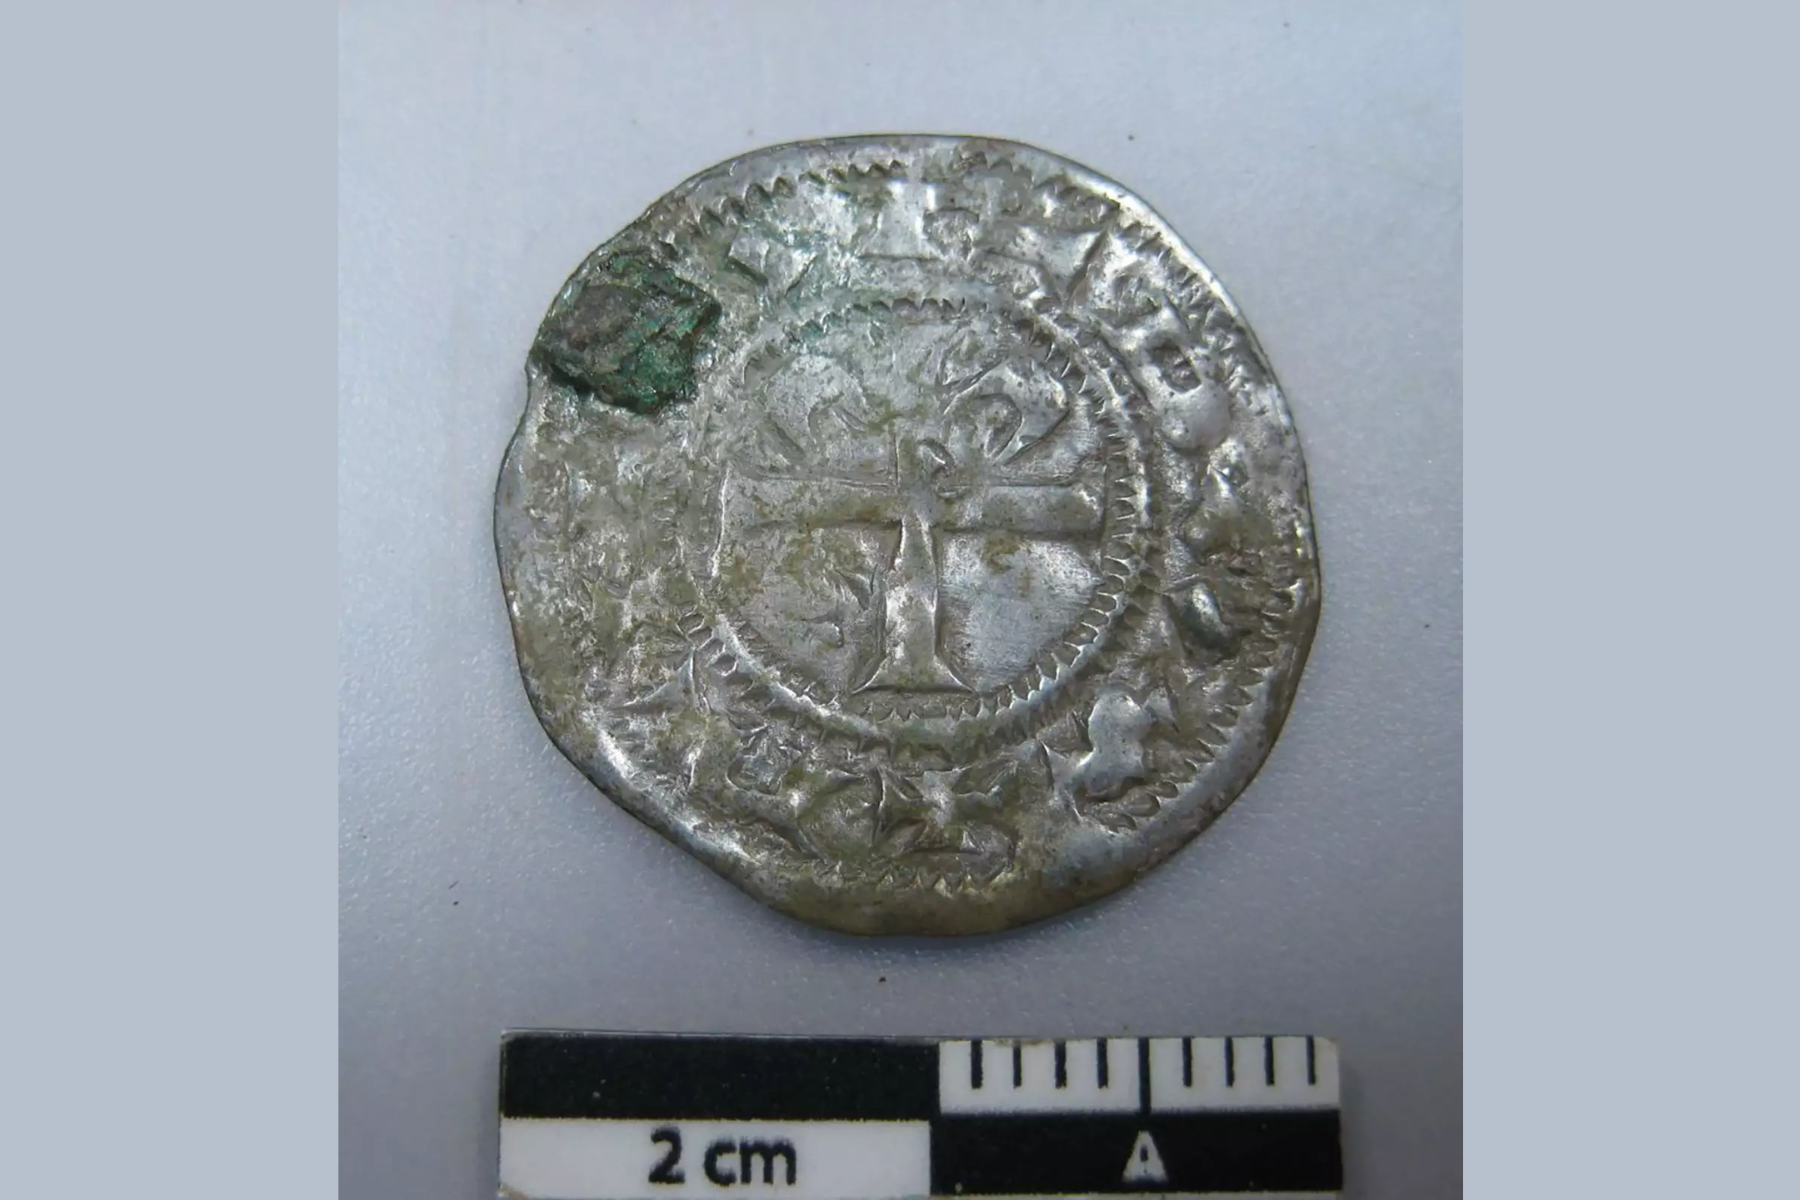 A Viking coin measuring 2 cm in length